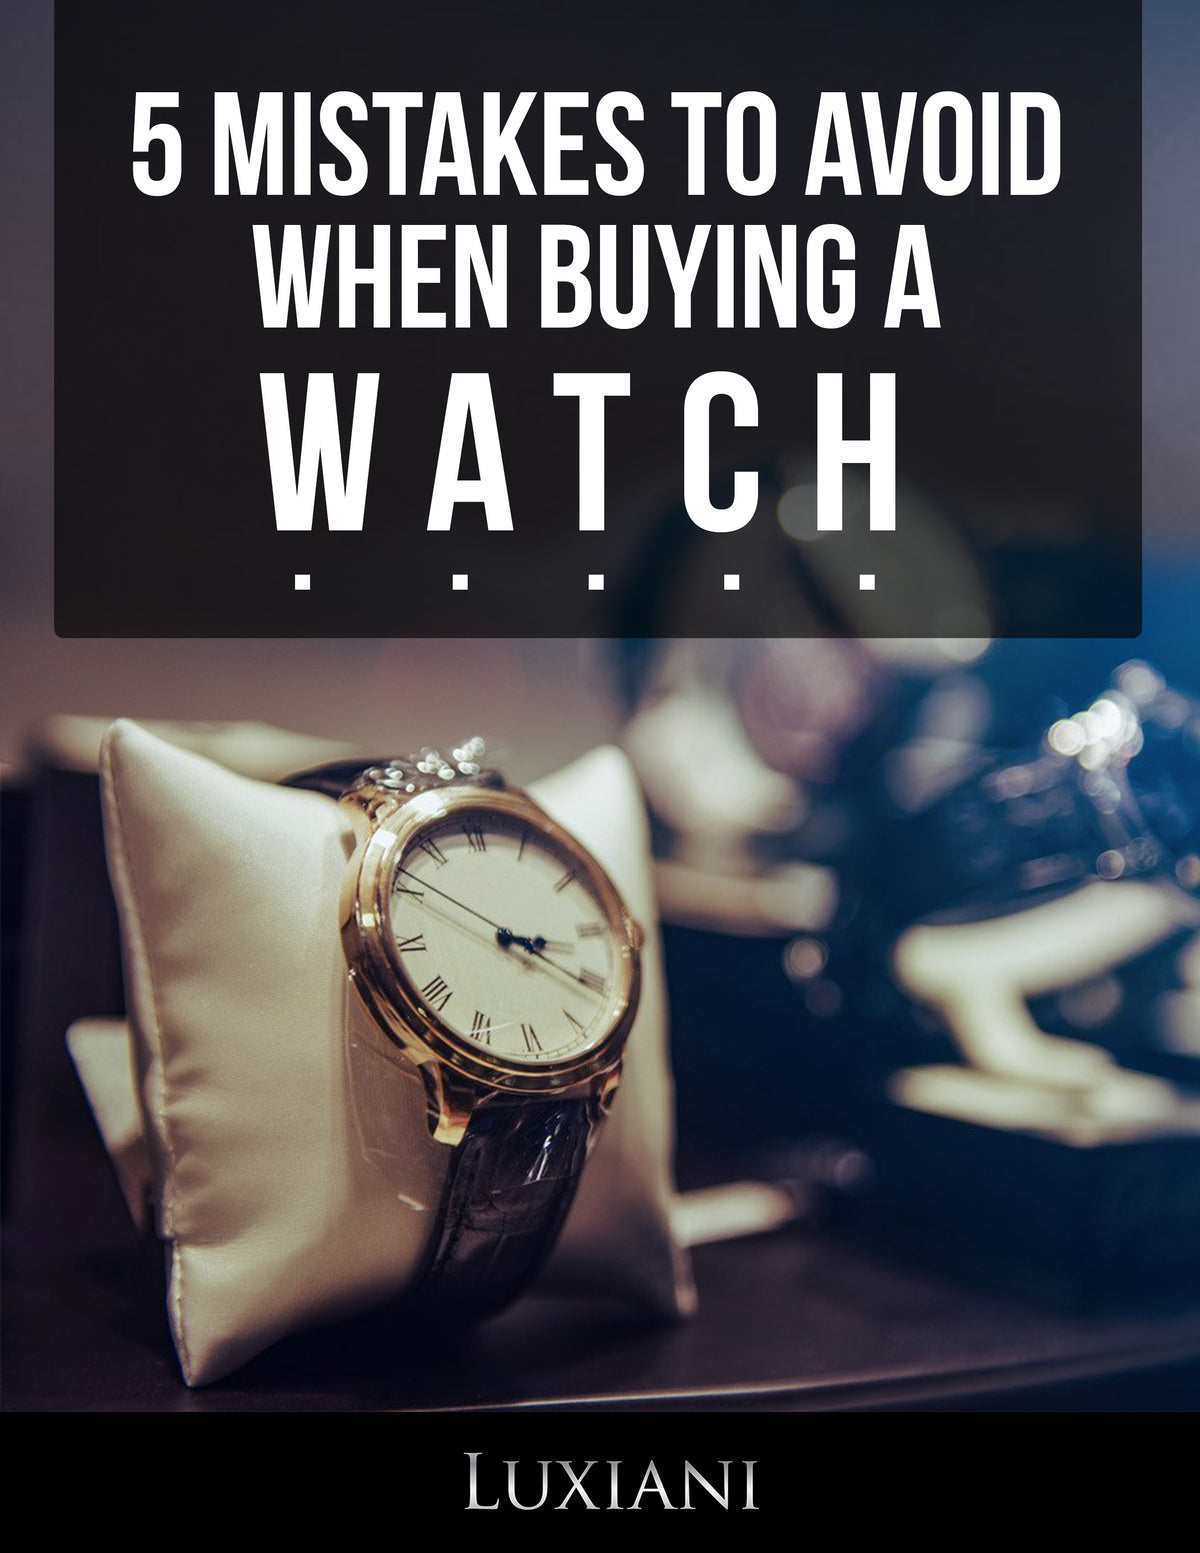 5 Mistakes People Make When Buying a Watch